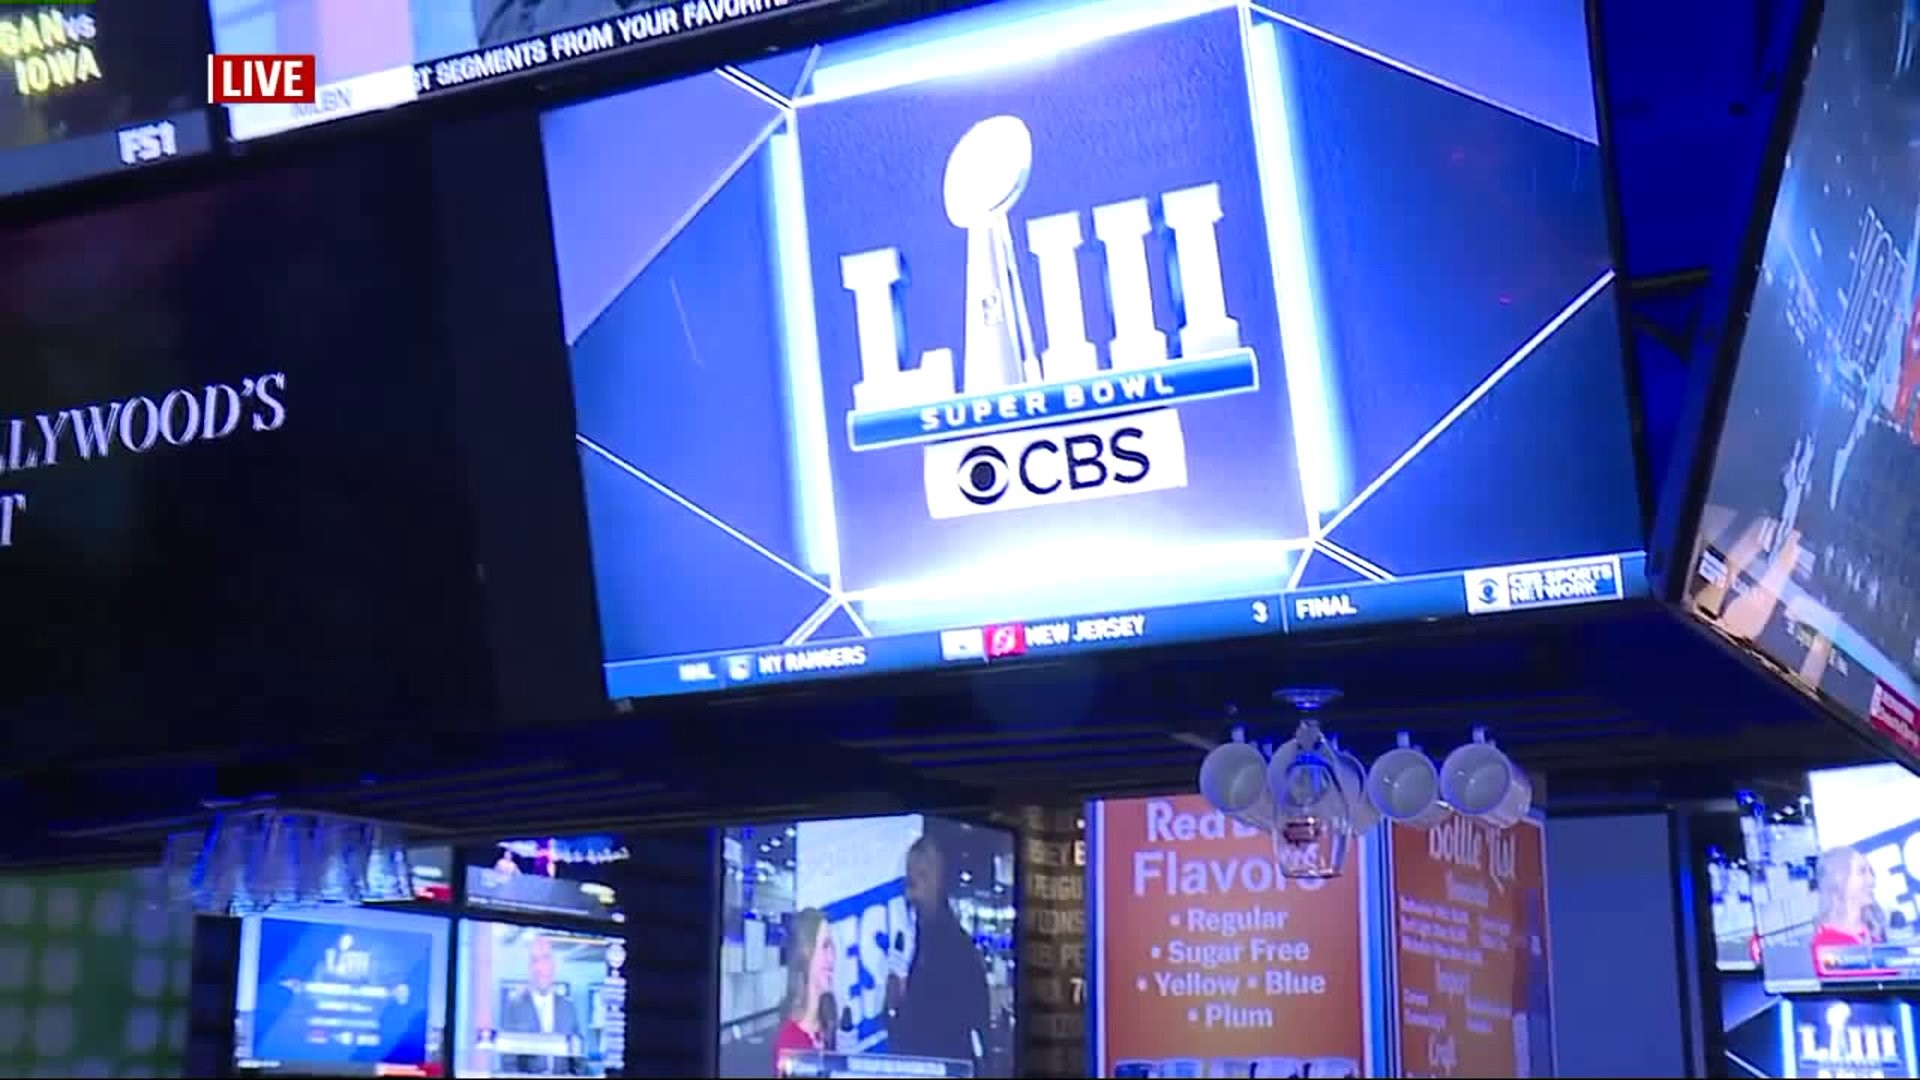 Dave & Buster’s gearing up for Super Bowl Sunday with fun, football